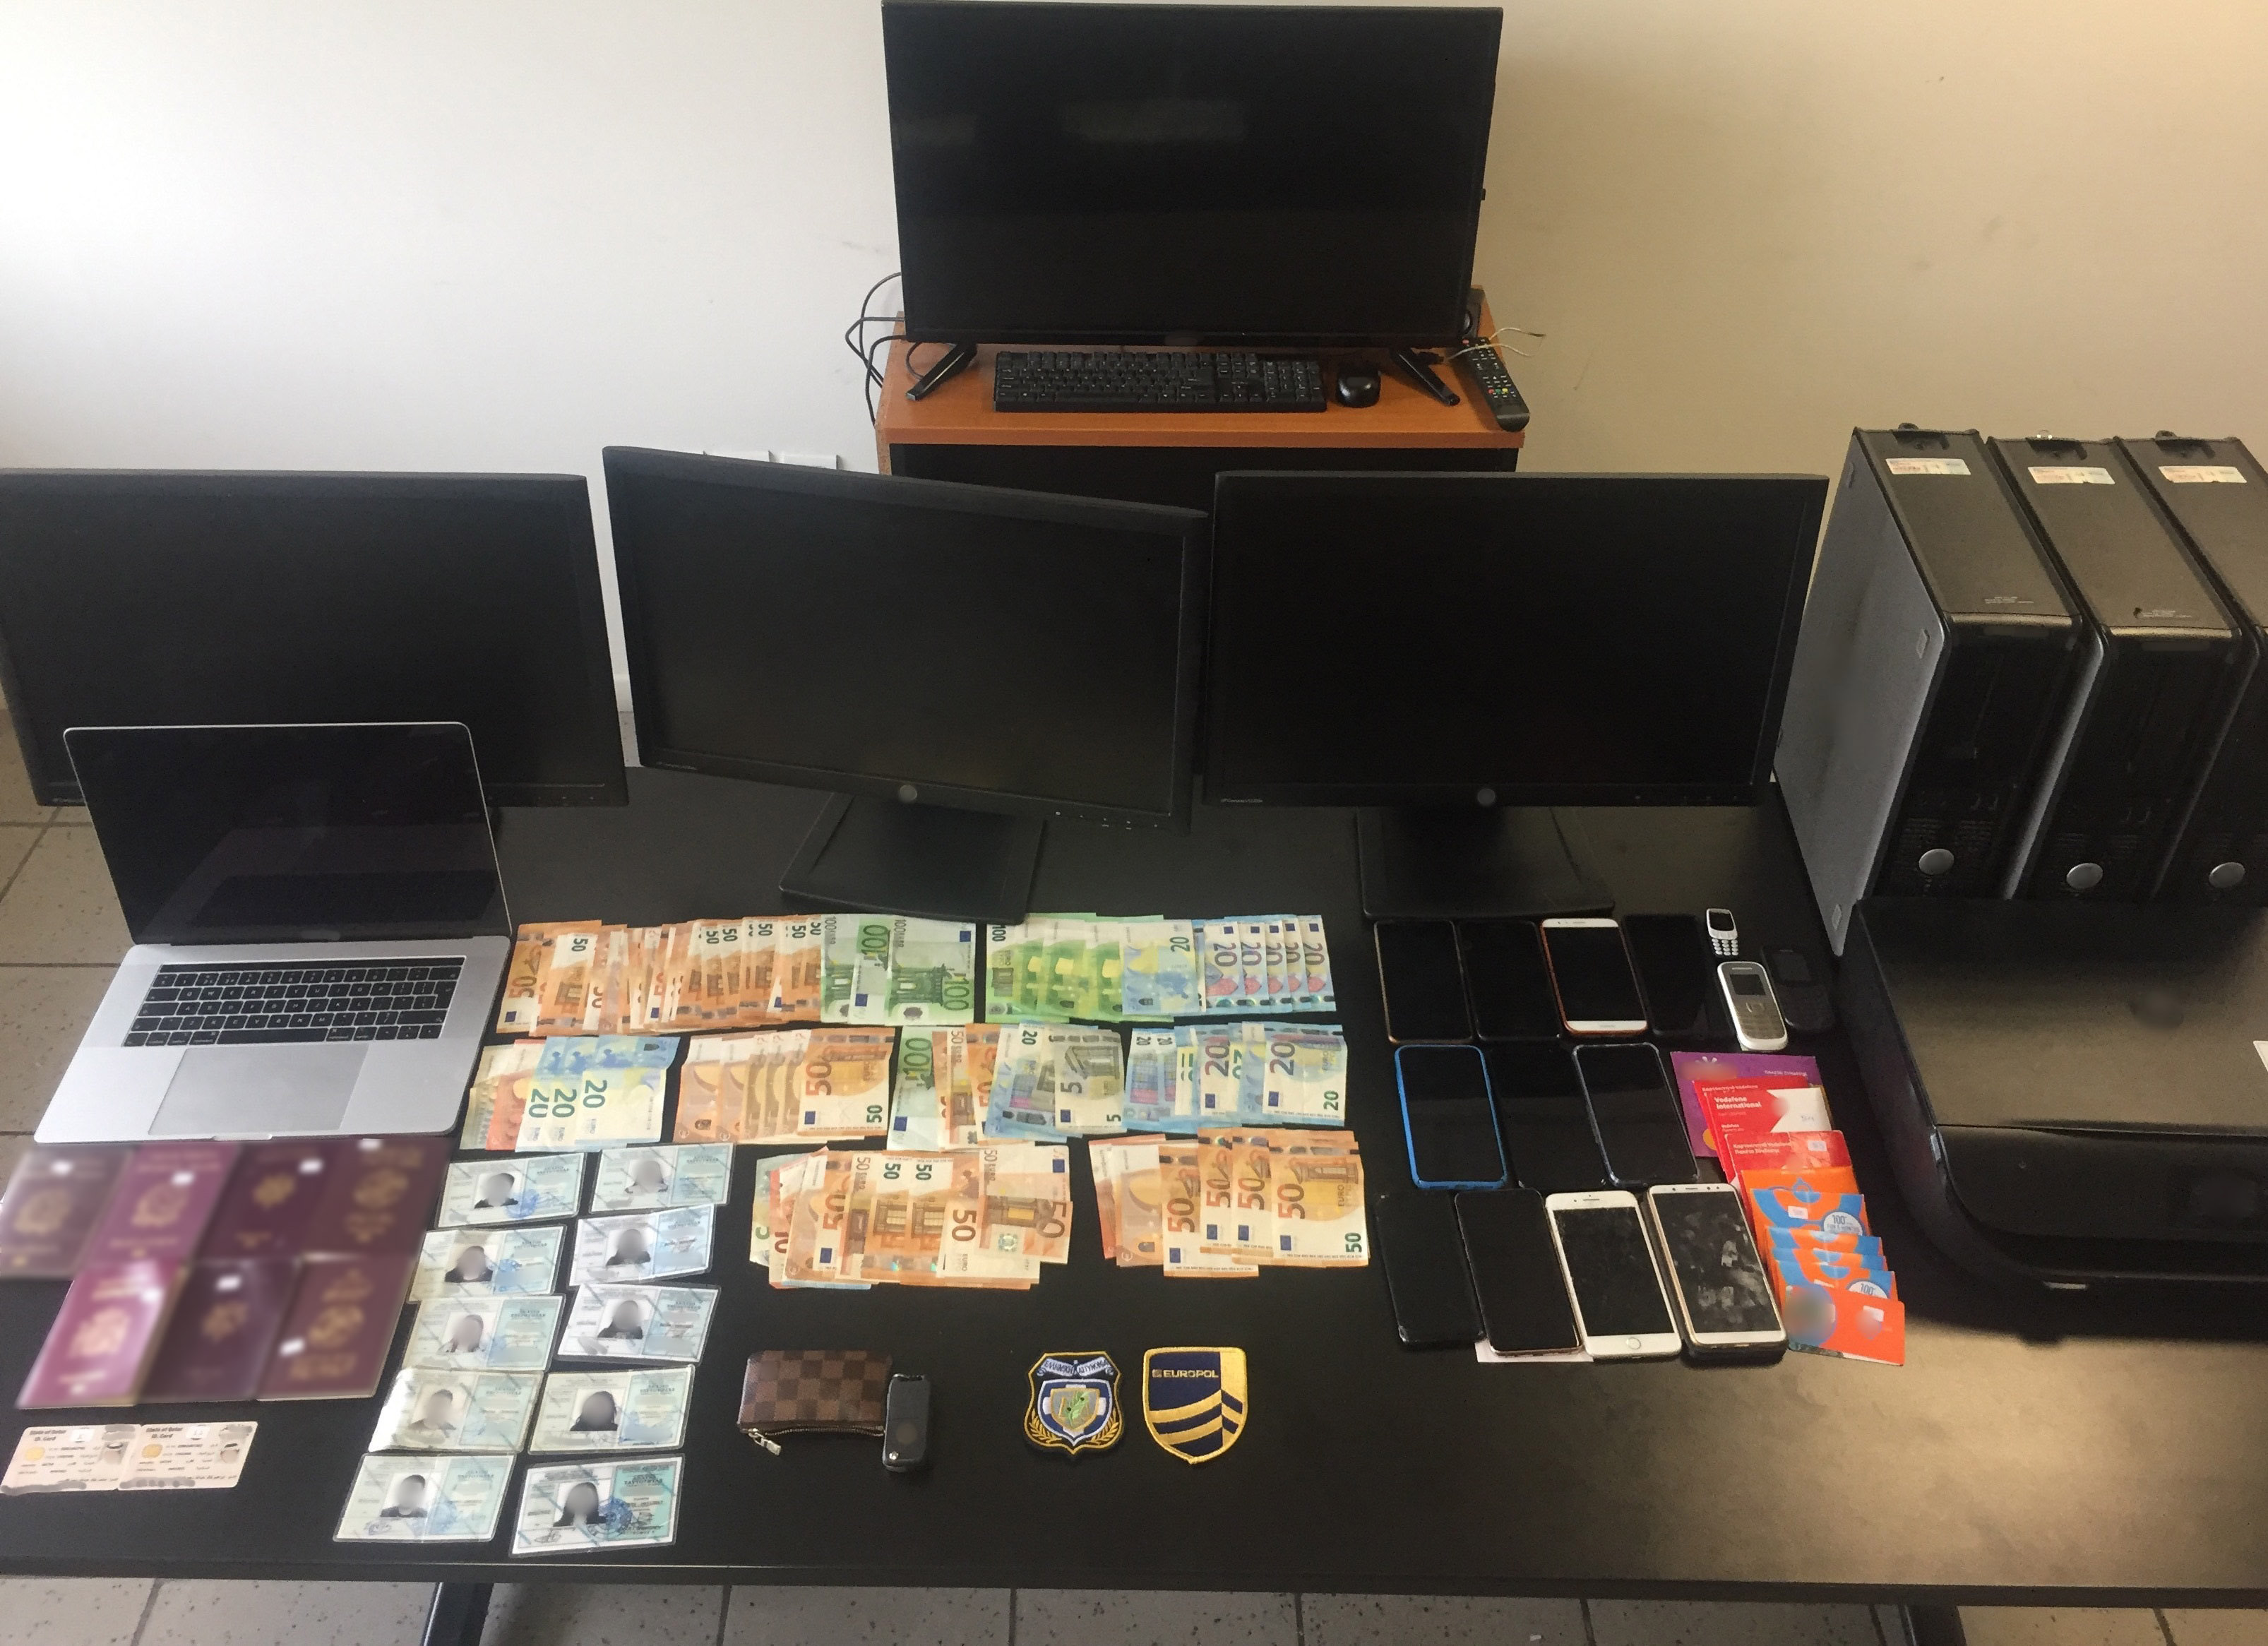 Police seized documents, cash, phones and computers during last week's raid. (Source: Hellenic Police)